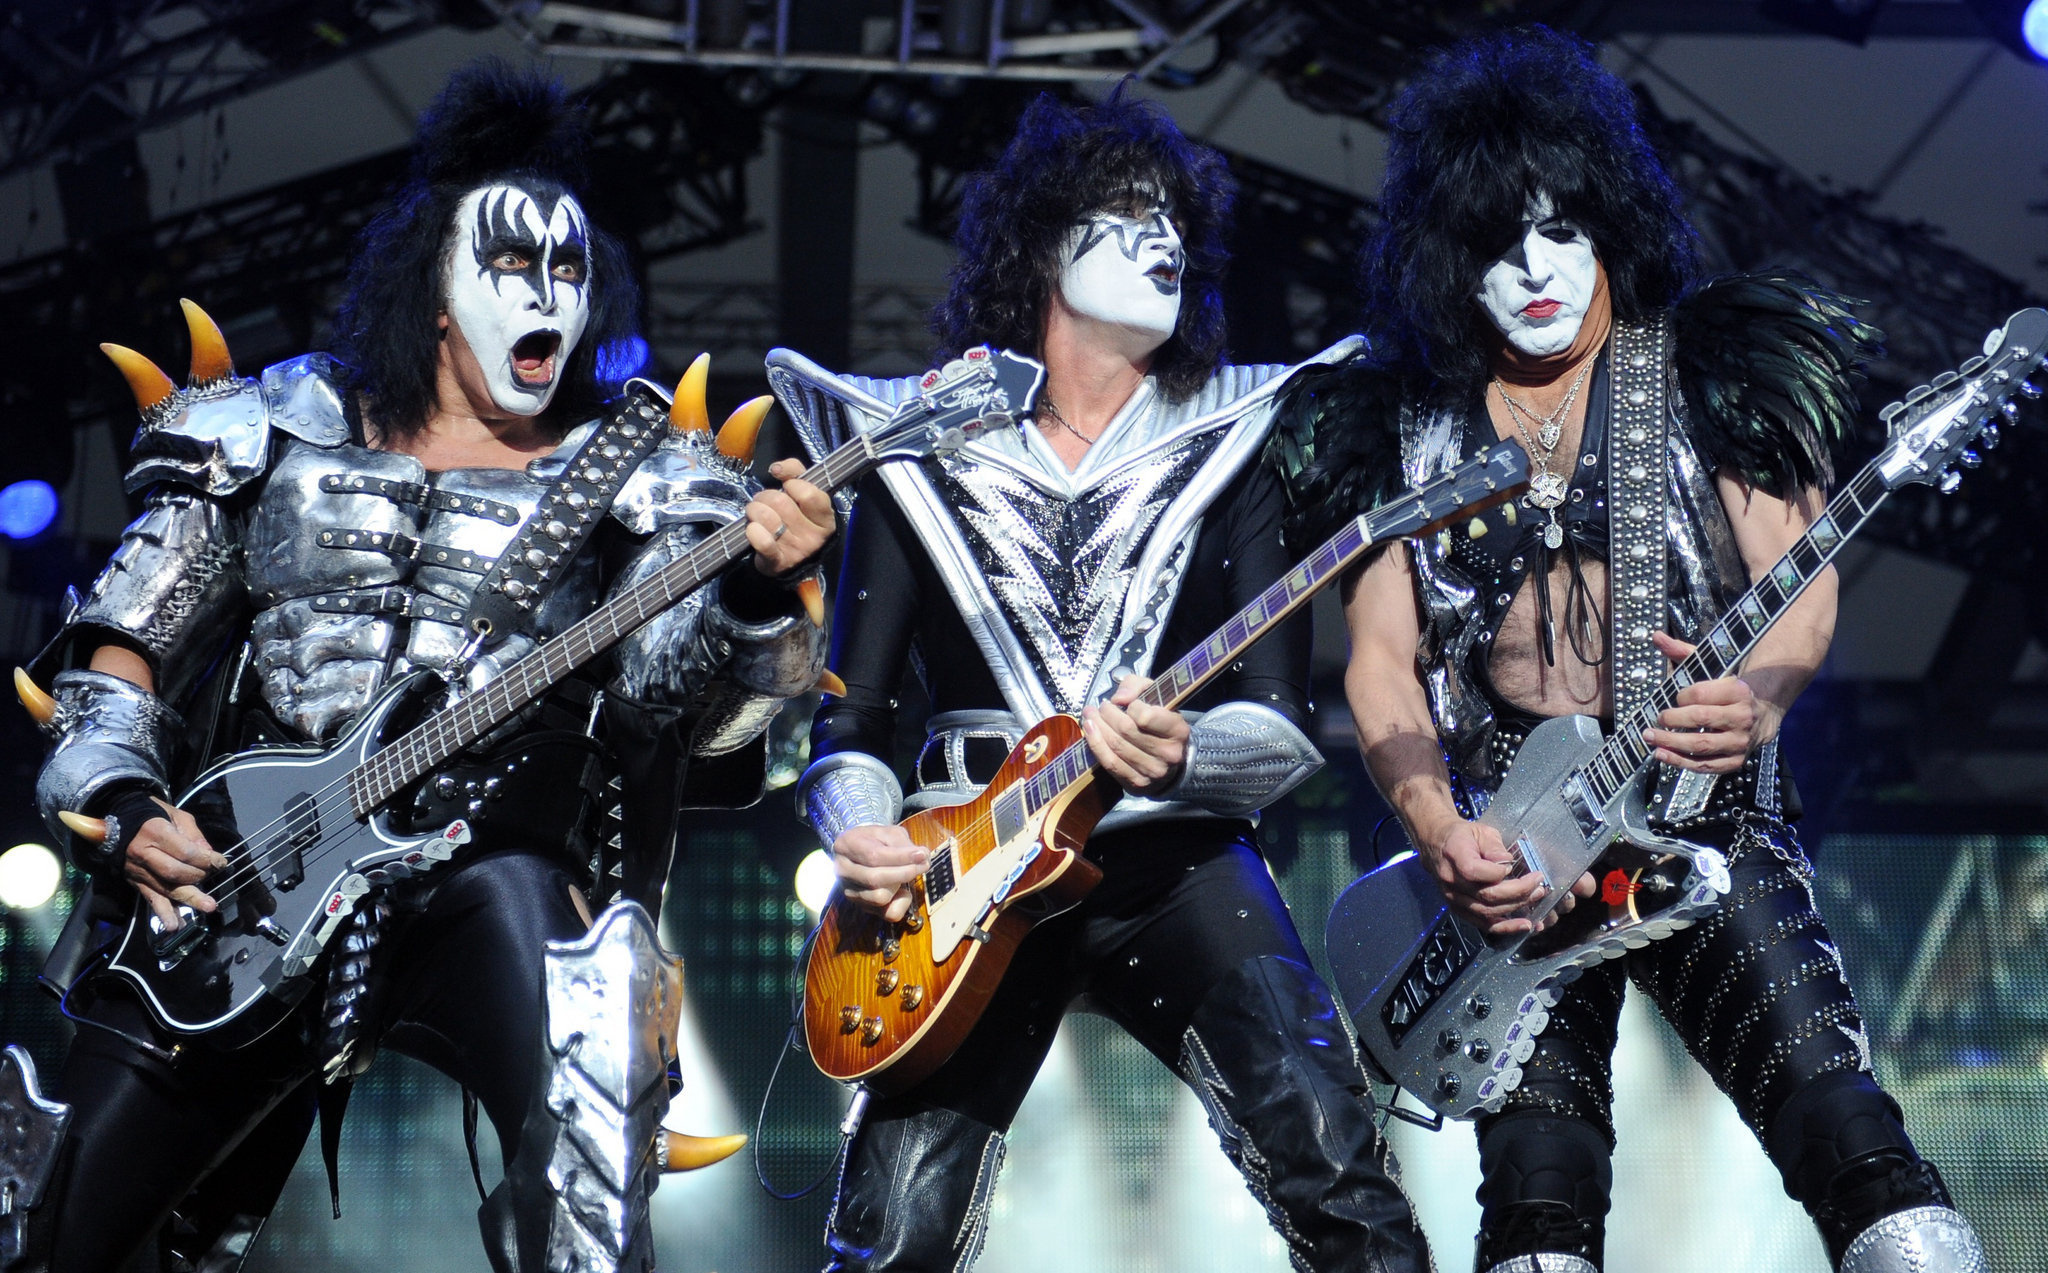 KISS Band, Gene Simmons wallpapers, Ultimate fan collection, Band member tribute, 2050x1280 HD Desktop